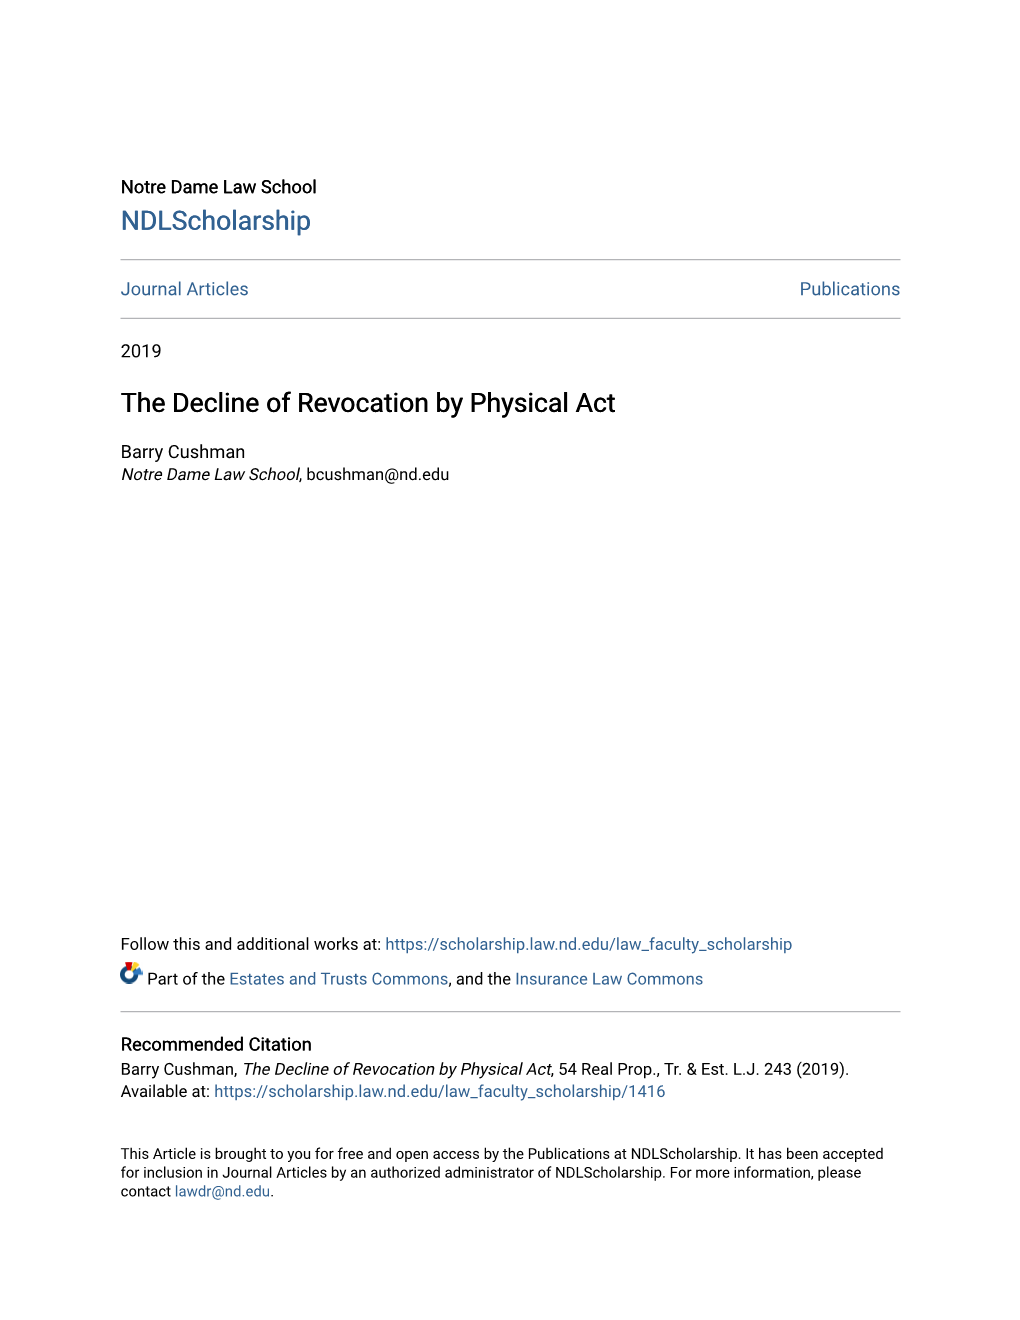 The Decline of Revocation by Physical Act